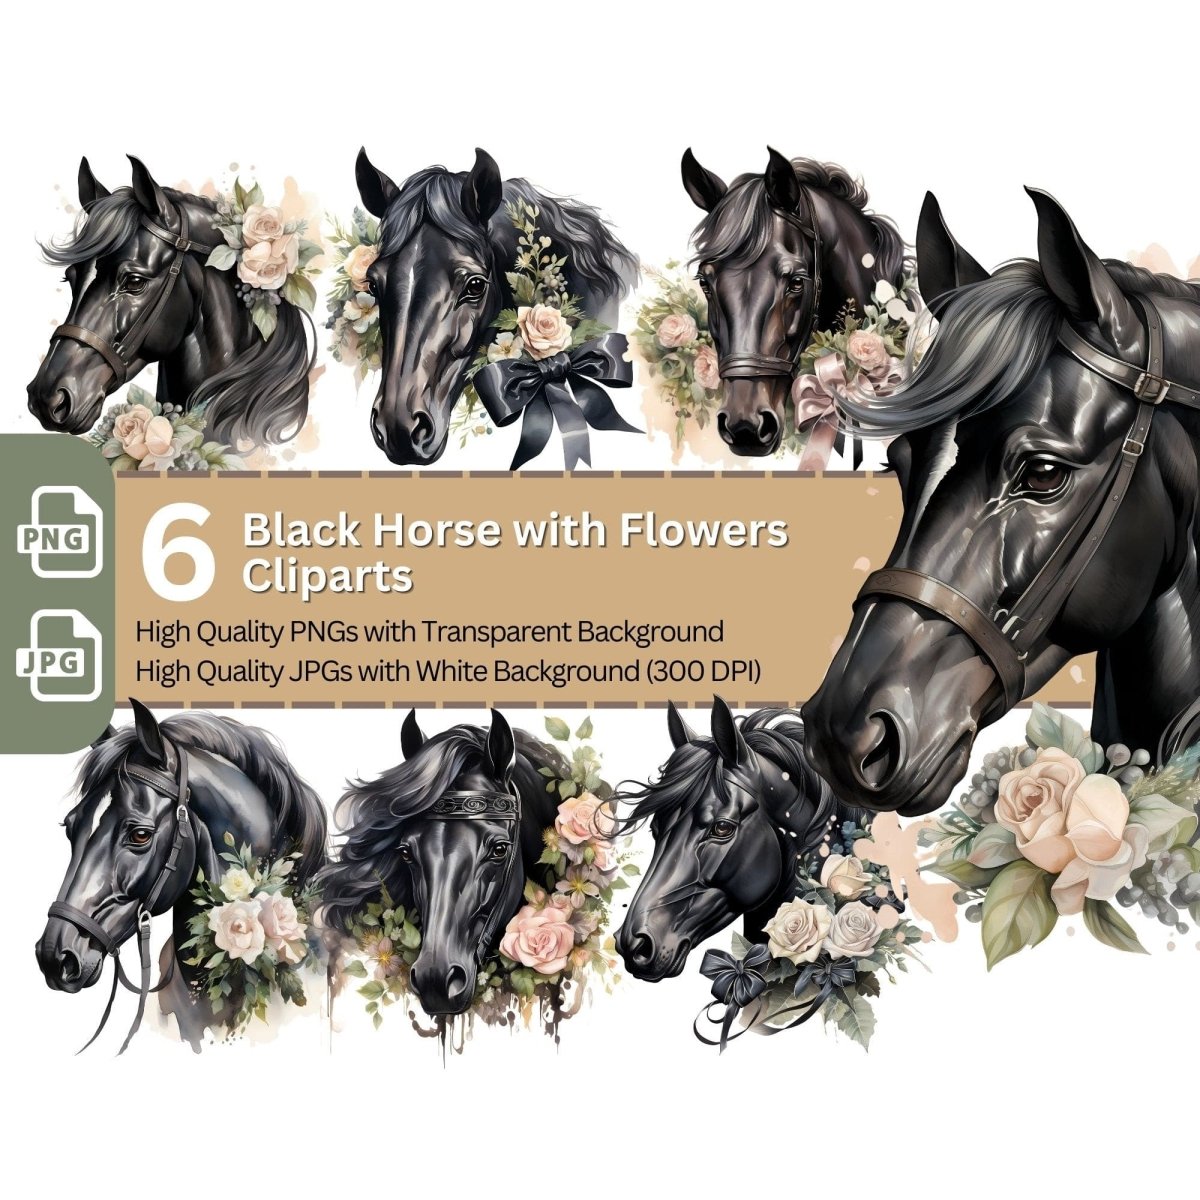 Black Horse with Flowers Cliparts 6+6 High Quality PNG Animal - Everything Pixel